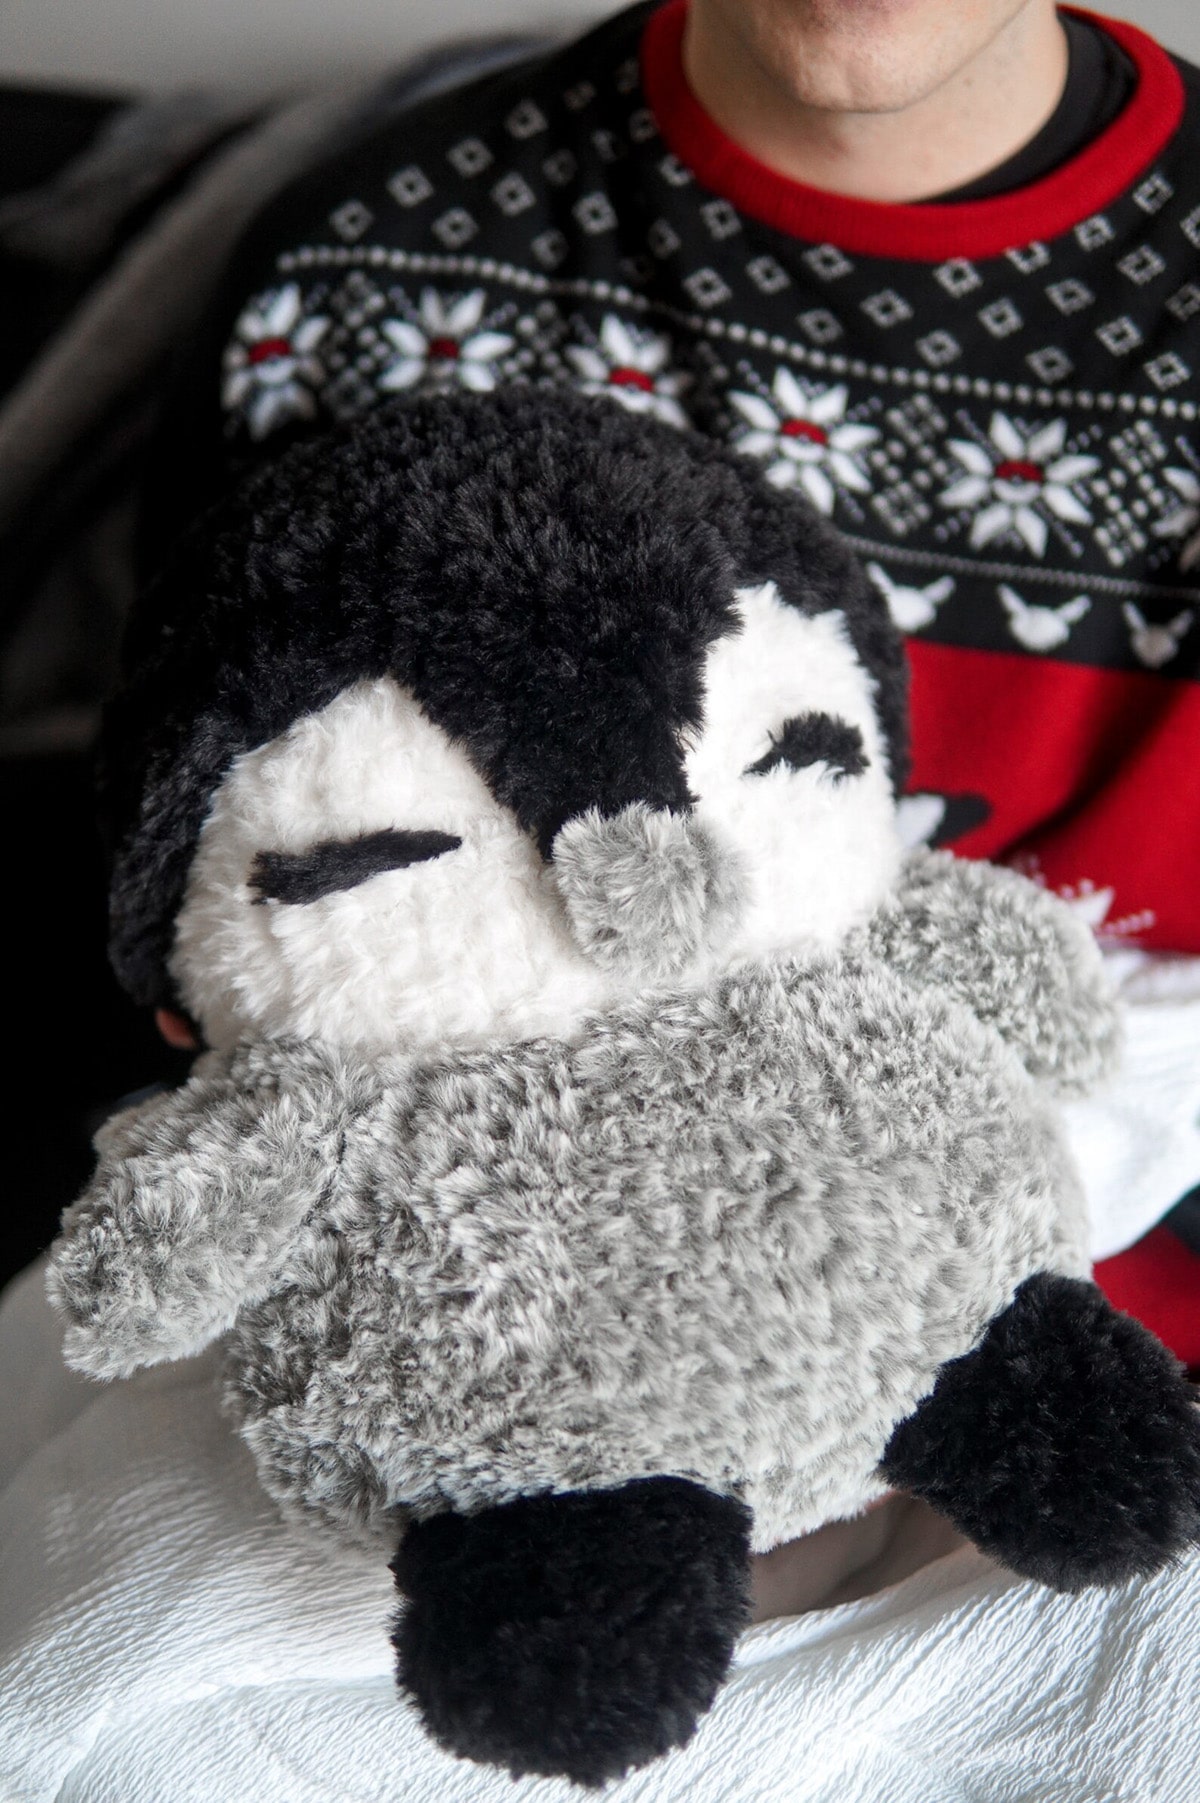 Large crochet penguin with a black and white face and gray fluffy body held by someone wearing a black and red Christmas jumper.